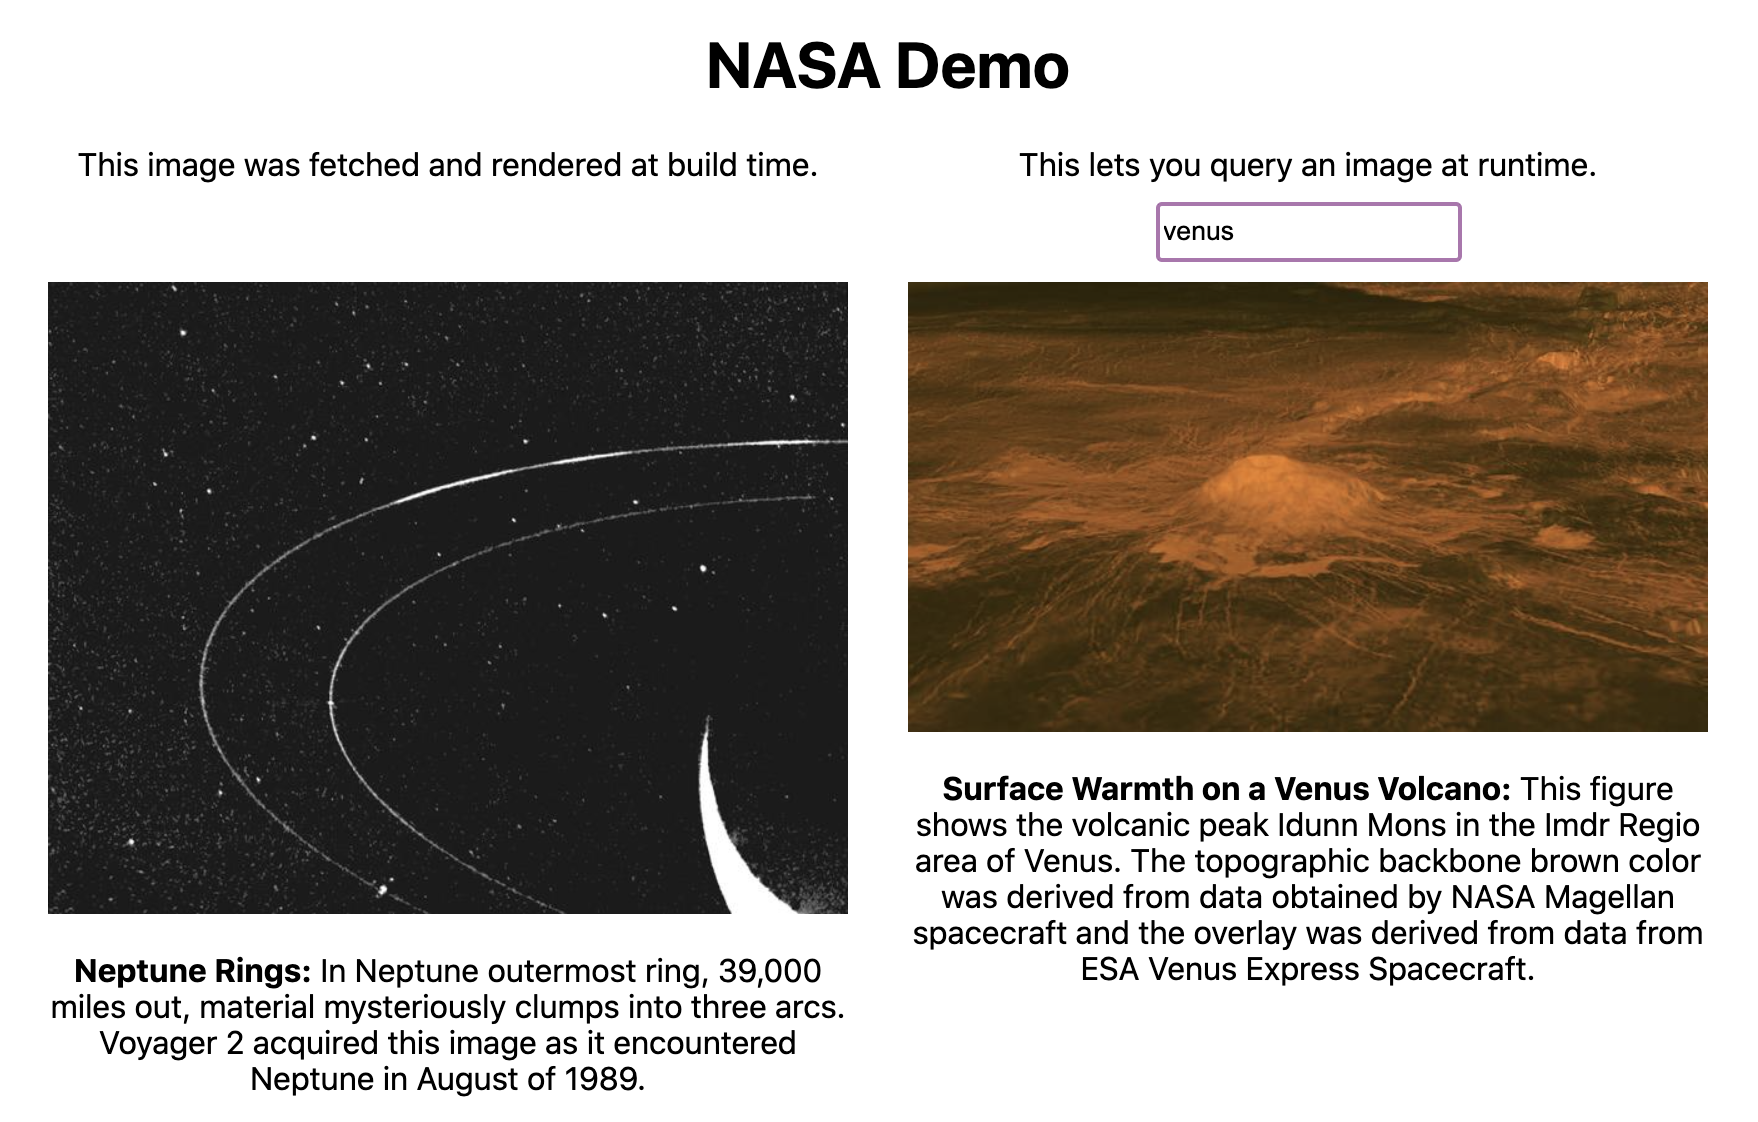 Preview demo site querying the NASA API, build time on the left, and runtime on the right